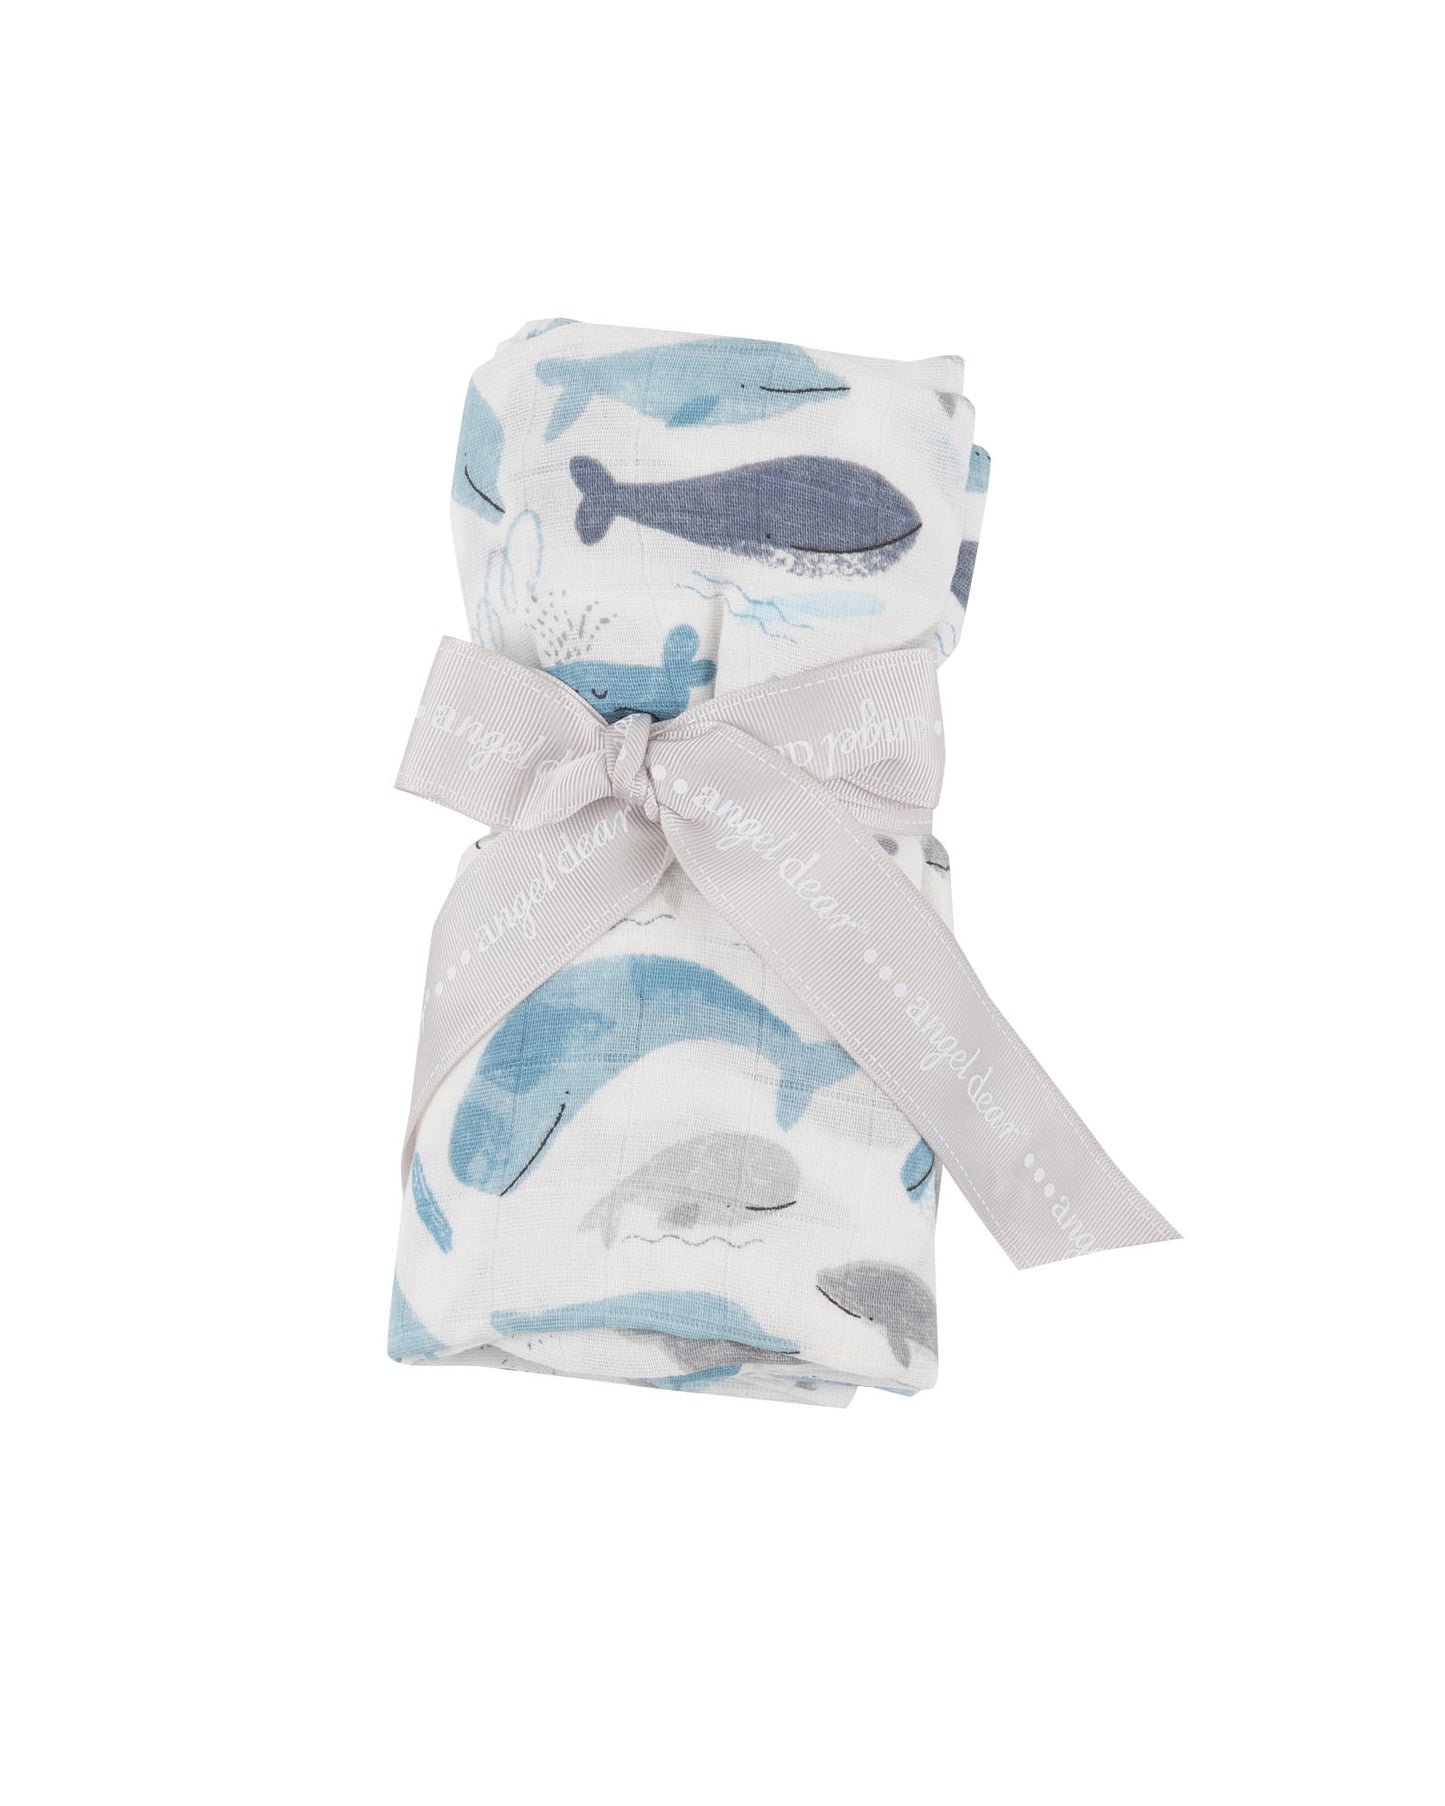 Blue Whales Swaddle by Angel Dear